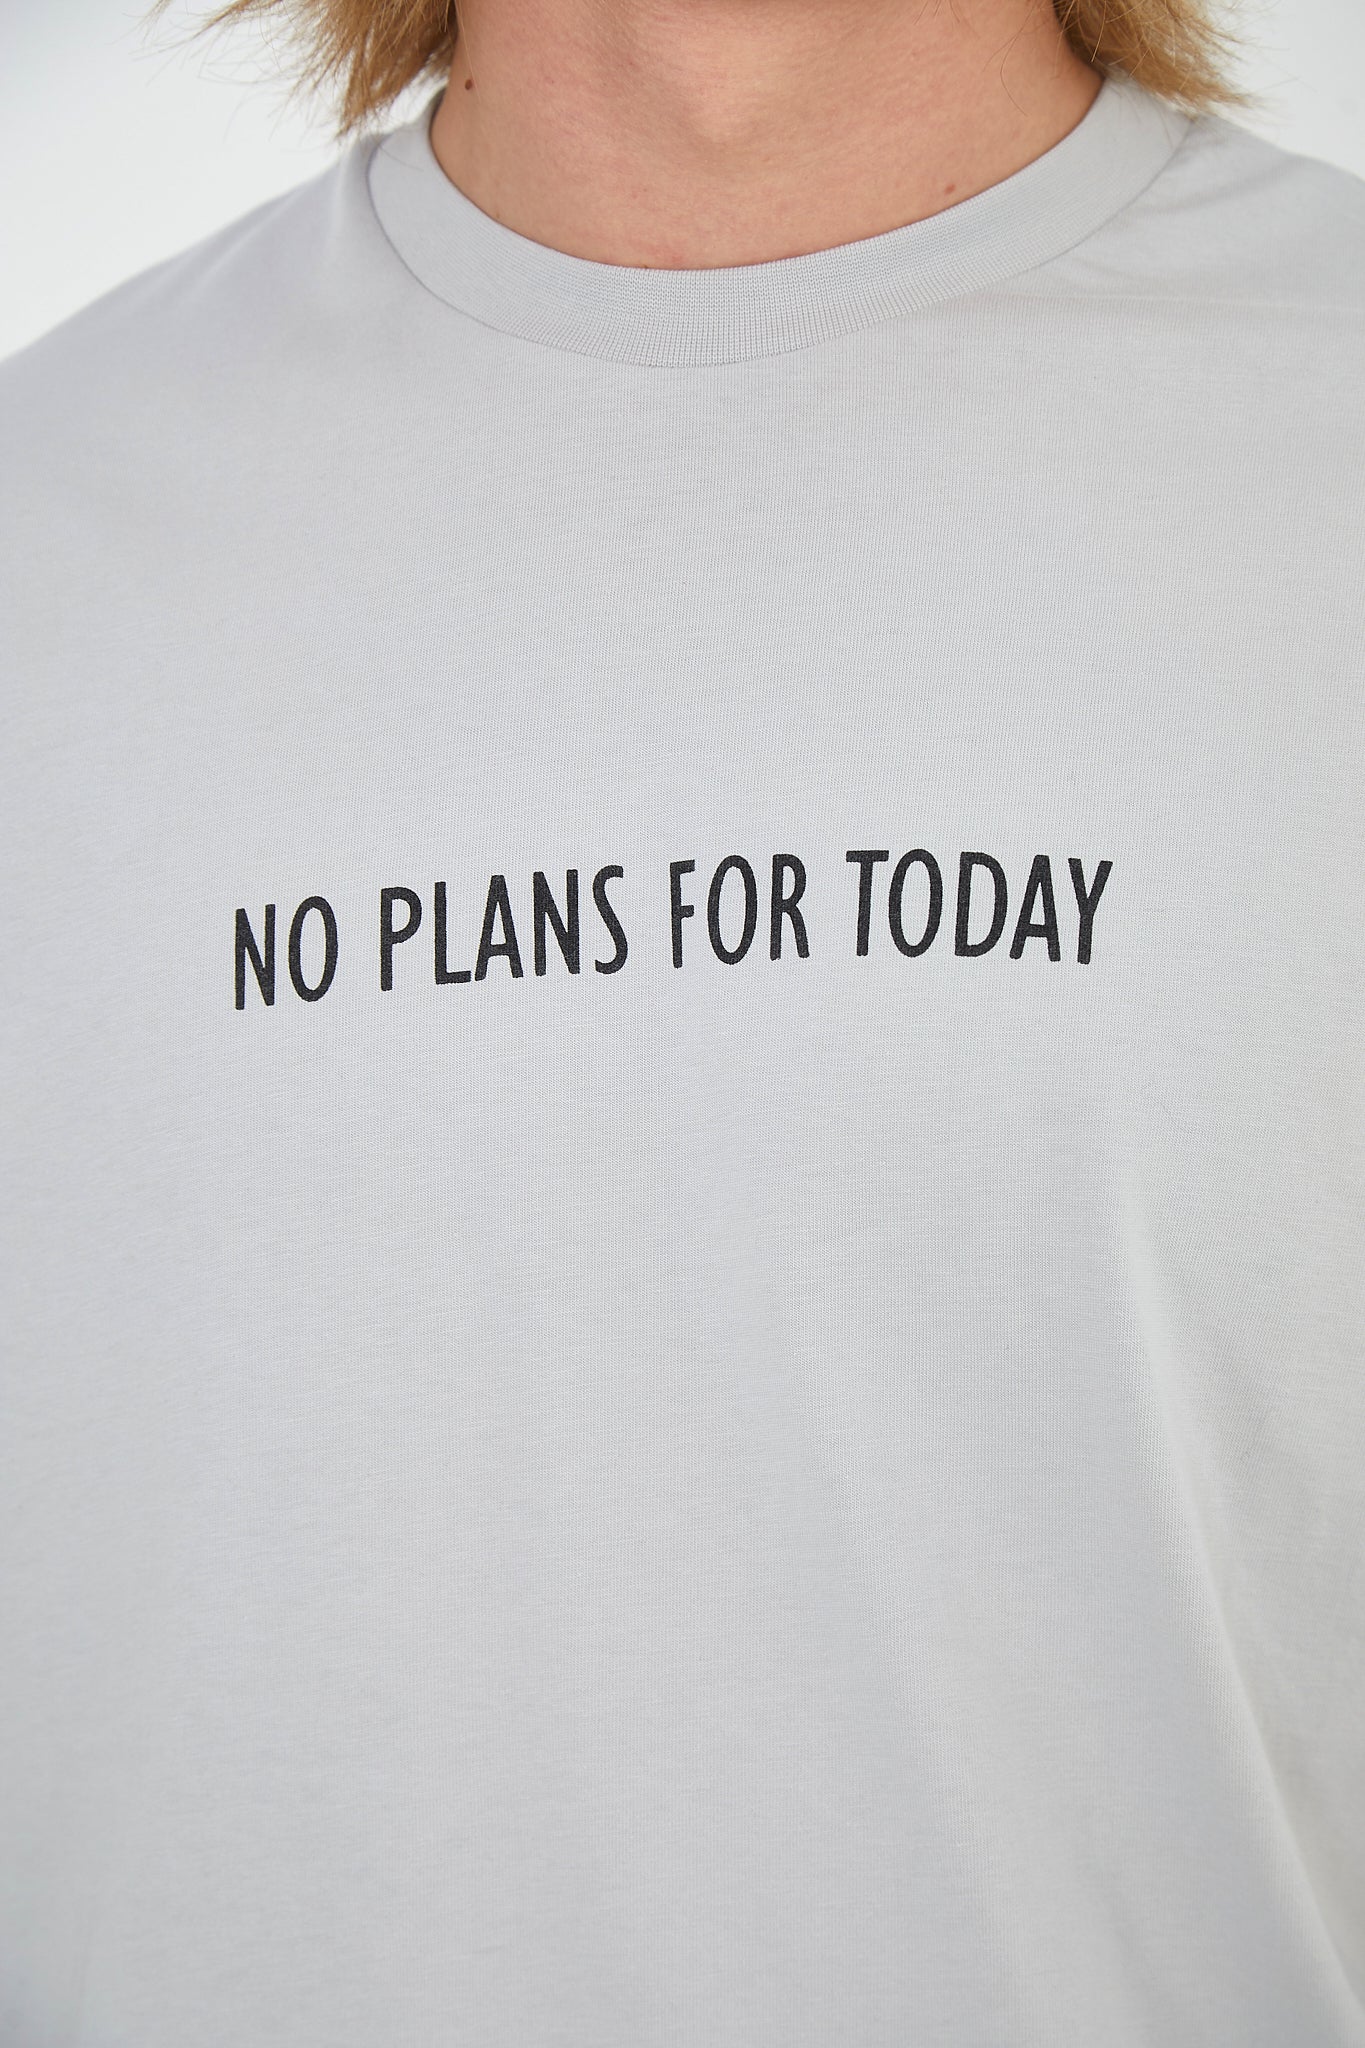 T-SHIRT - NO PLANS FOR TODAY - DYS-Amsterdam